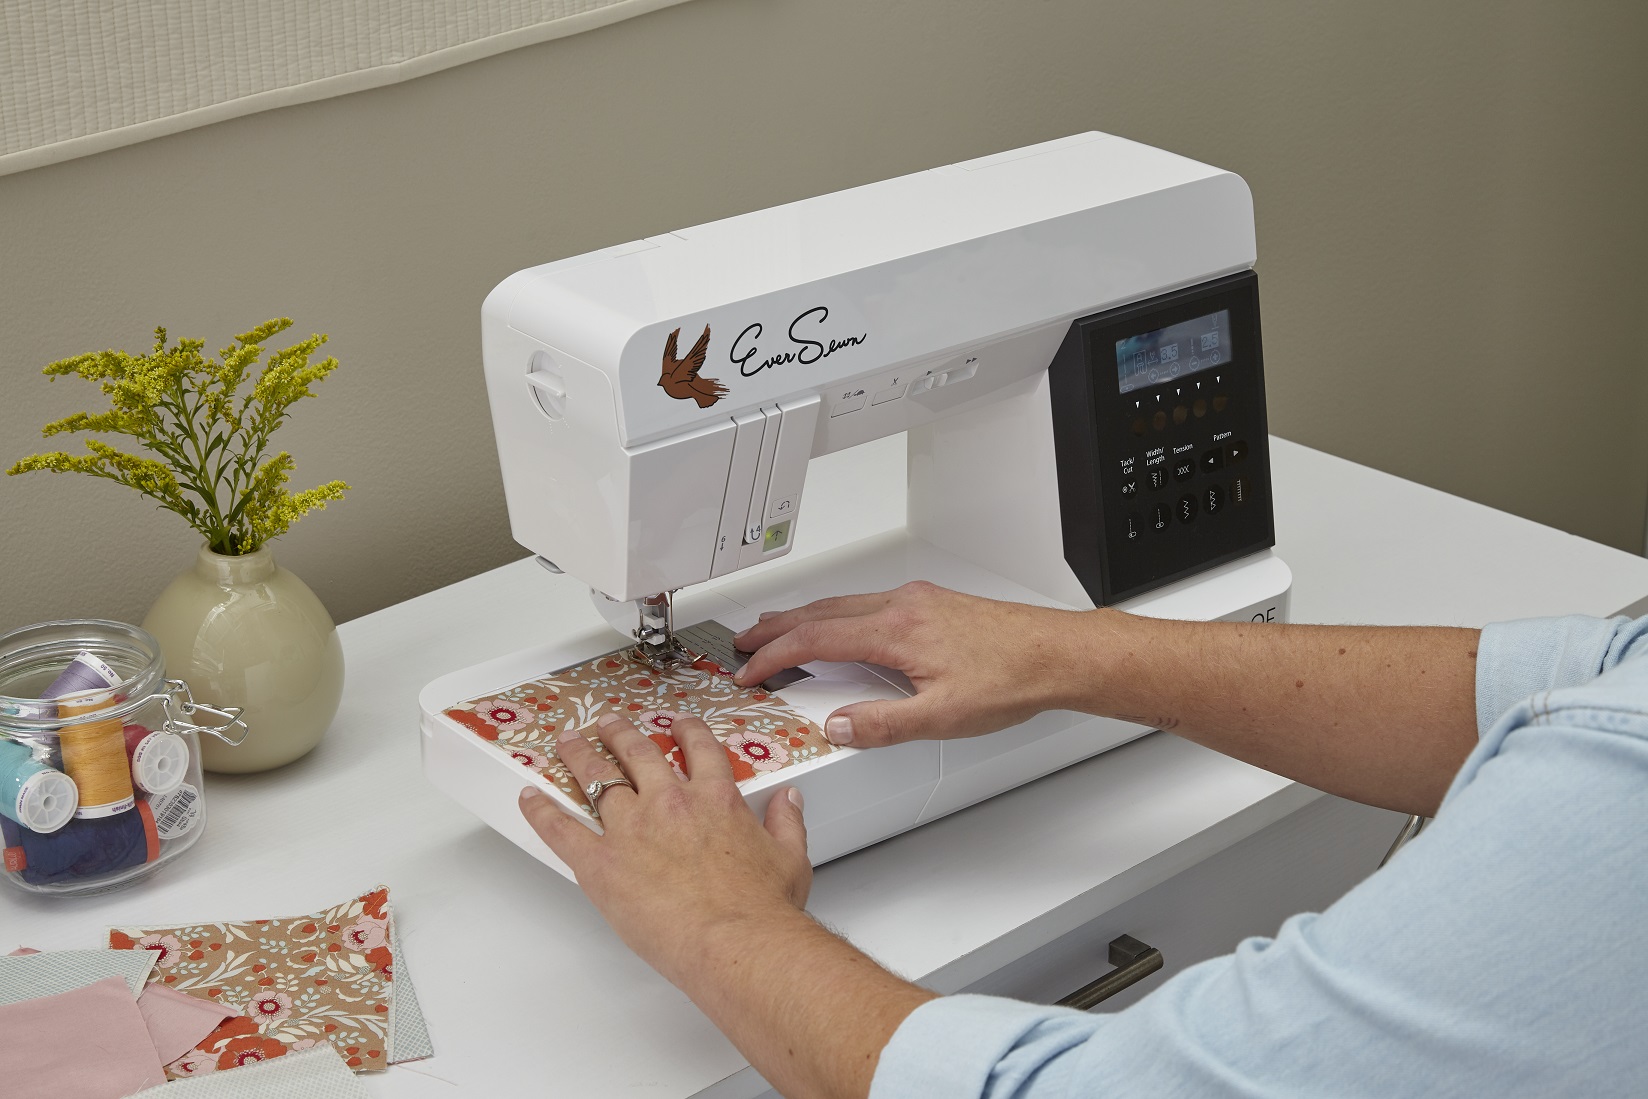 Categories EverSewn Ultimate Sewing Starter Kit for sale online